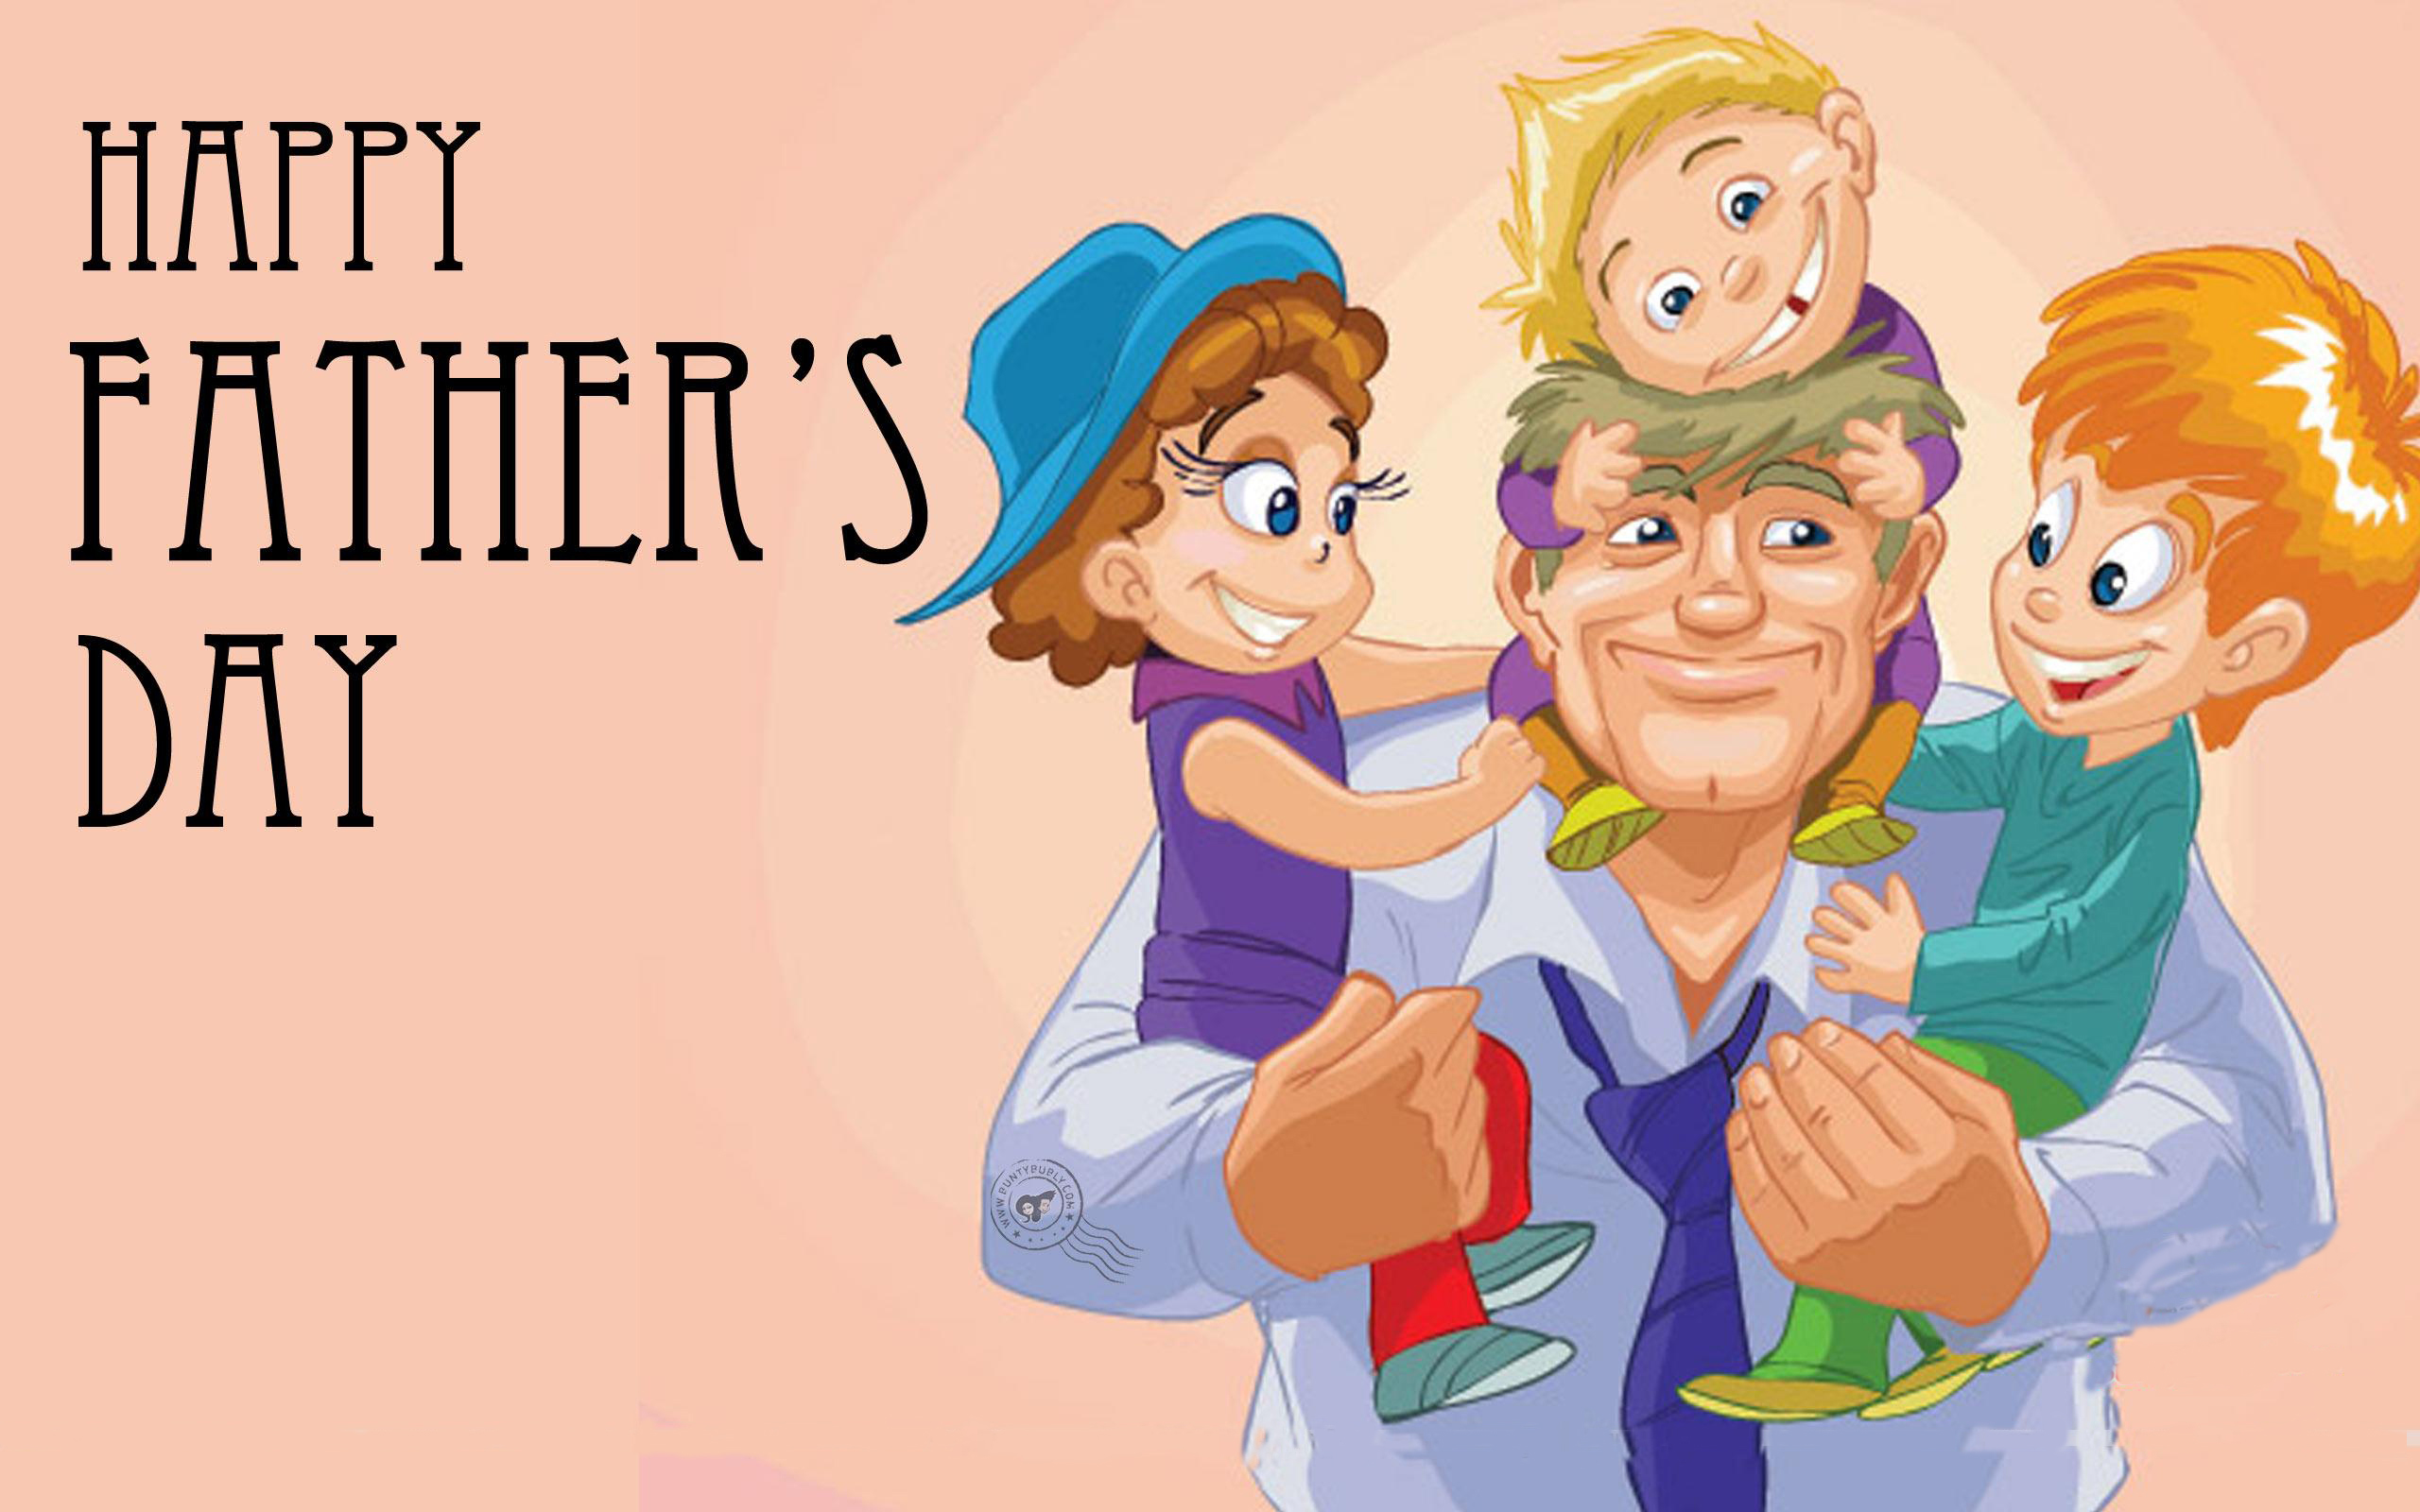 HD Father's Day desktop wallpaper featuring a joyful cartoon dad with three kids hugging him and the text Happy Father's Day.